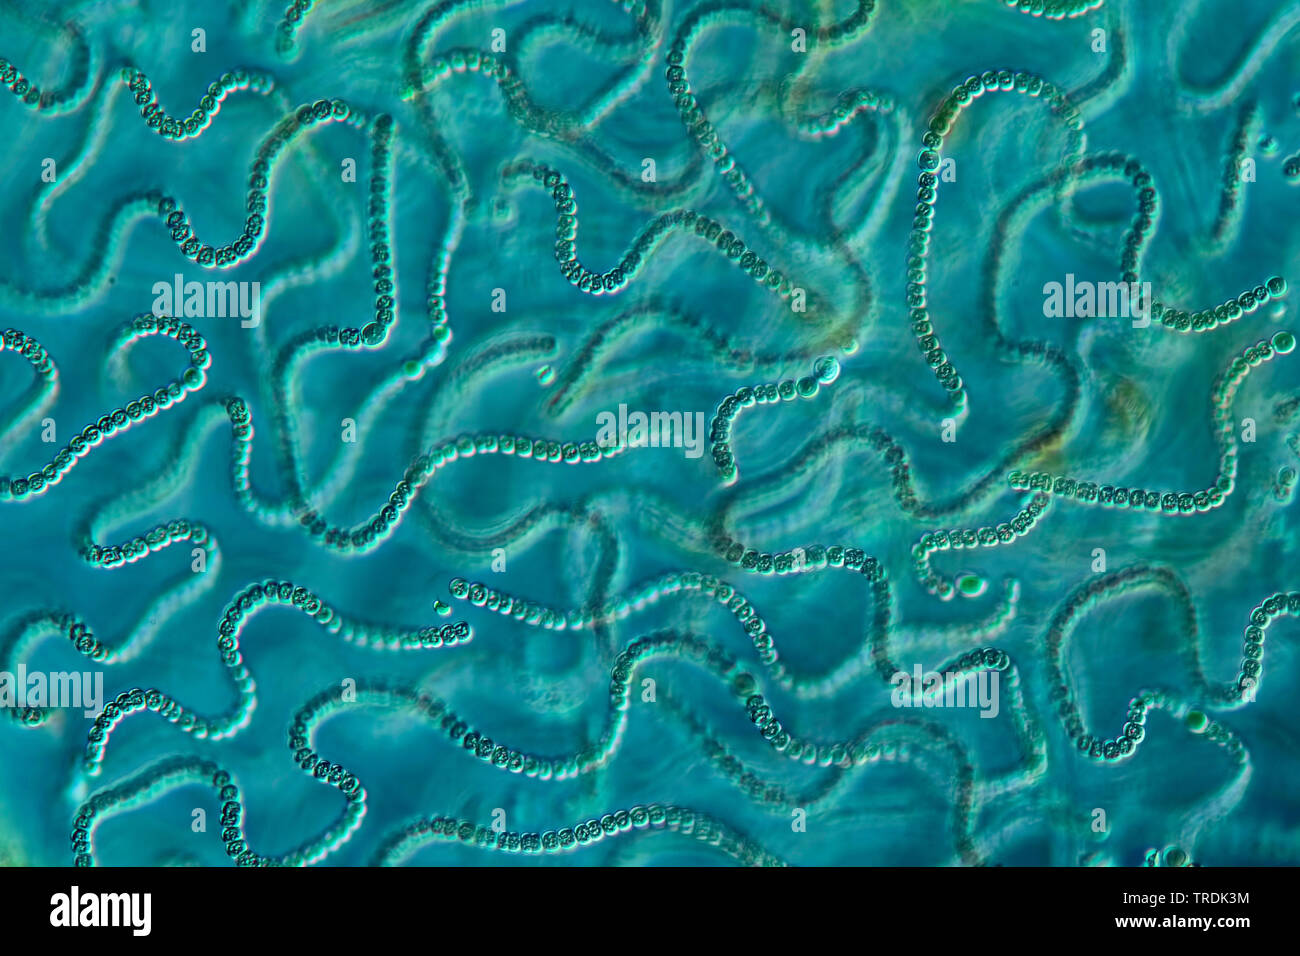 blue-green alga (Cyanobakterien), filaments of Nostoc in differential interference contrast, x 100 Stock Photo